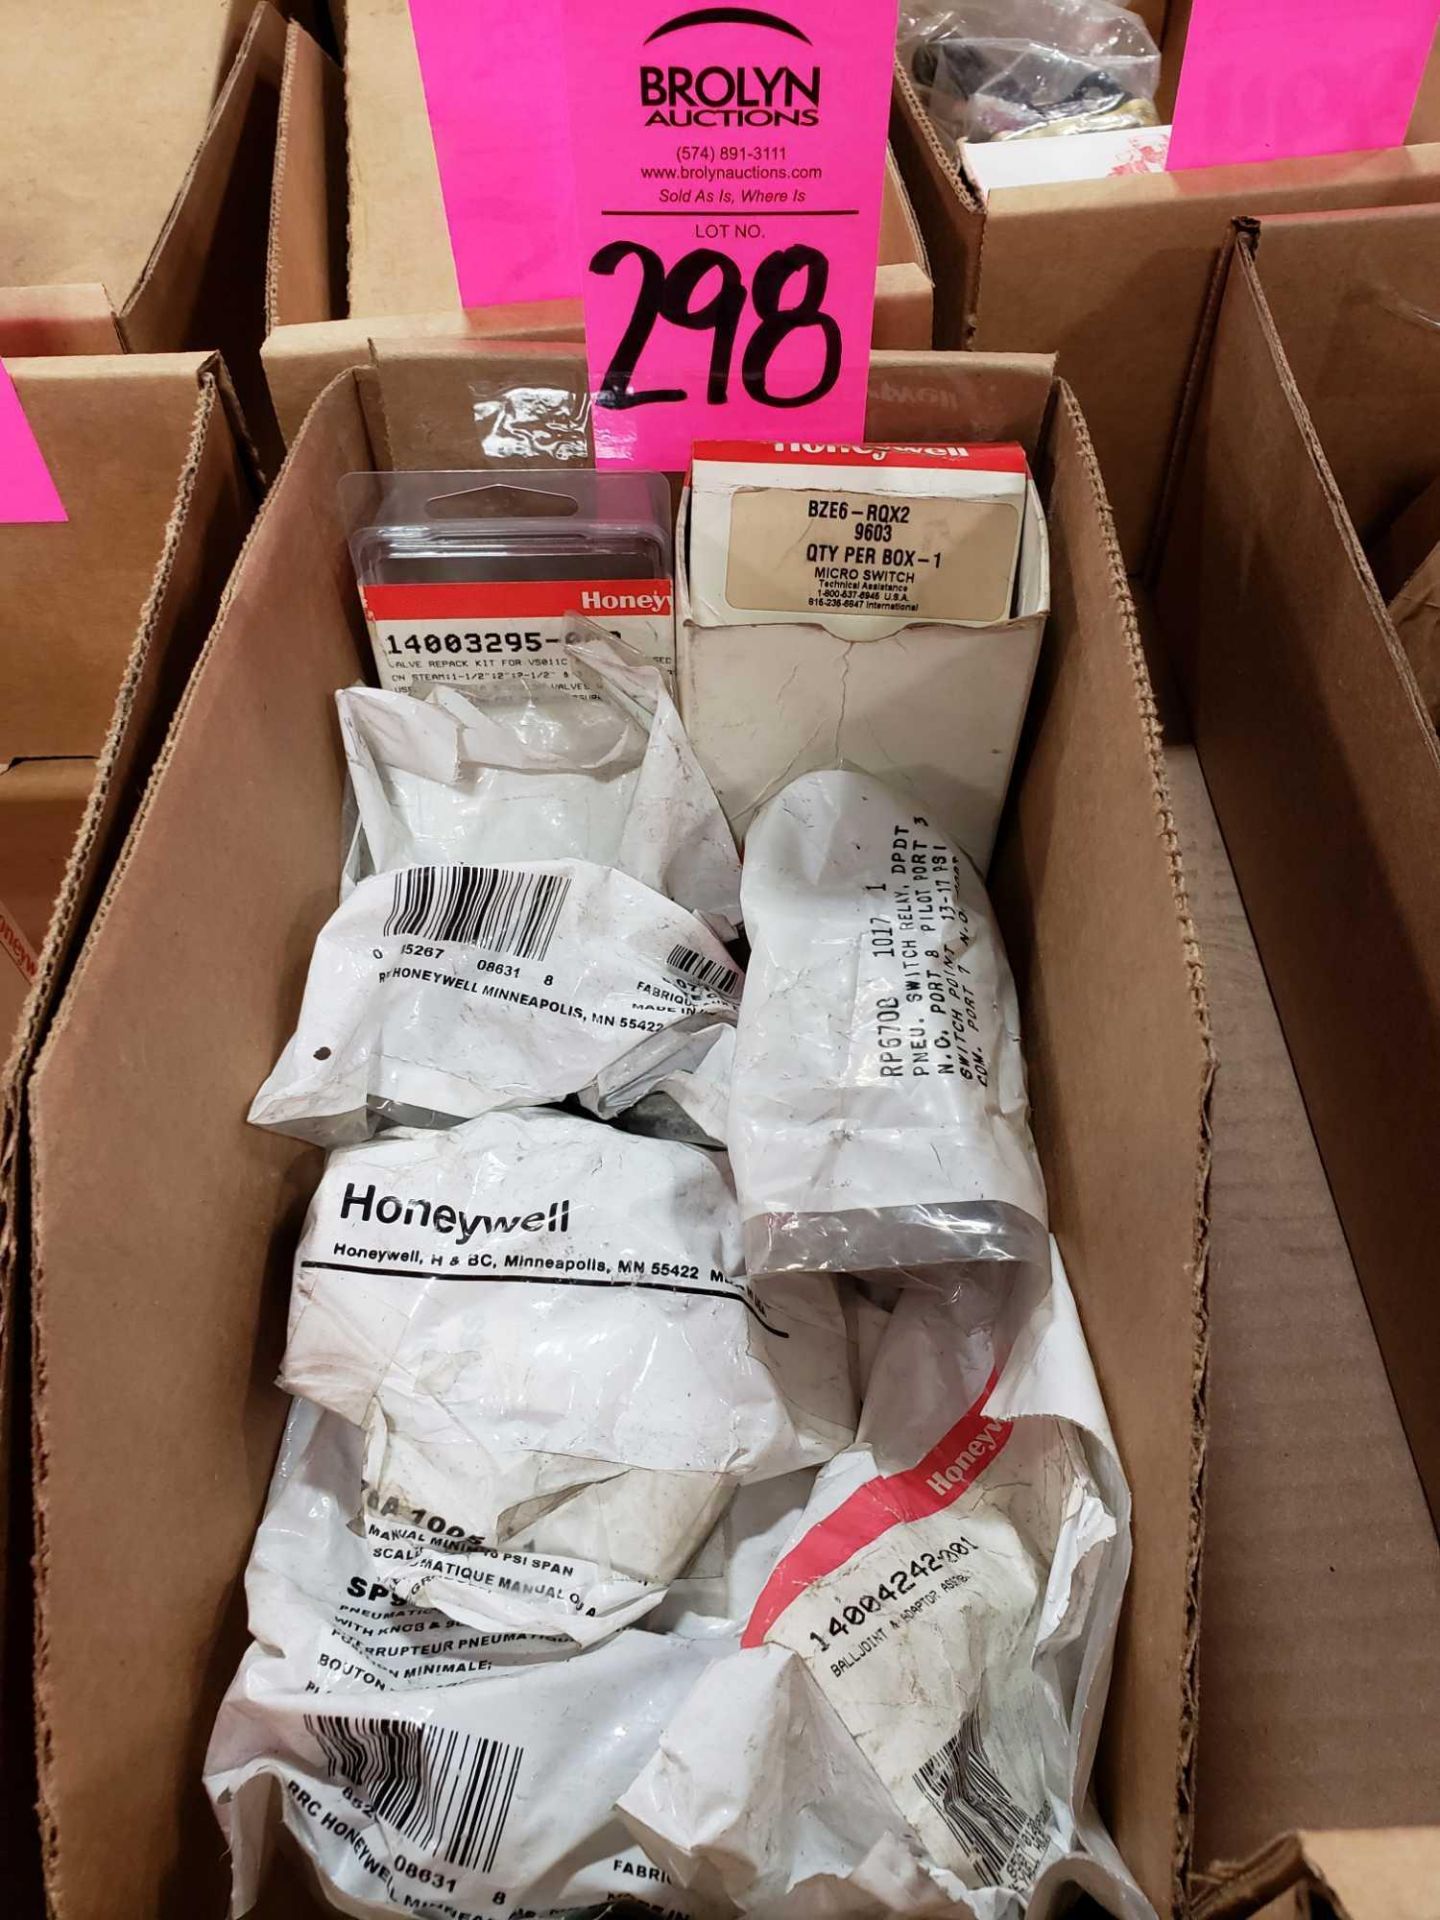 Large assortment of honeywell parts. New in package.